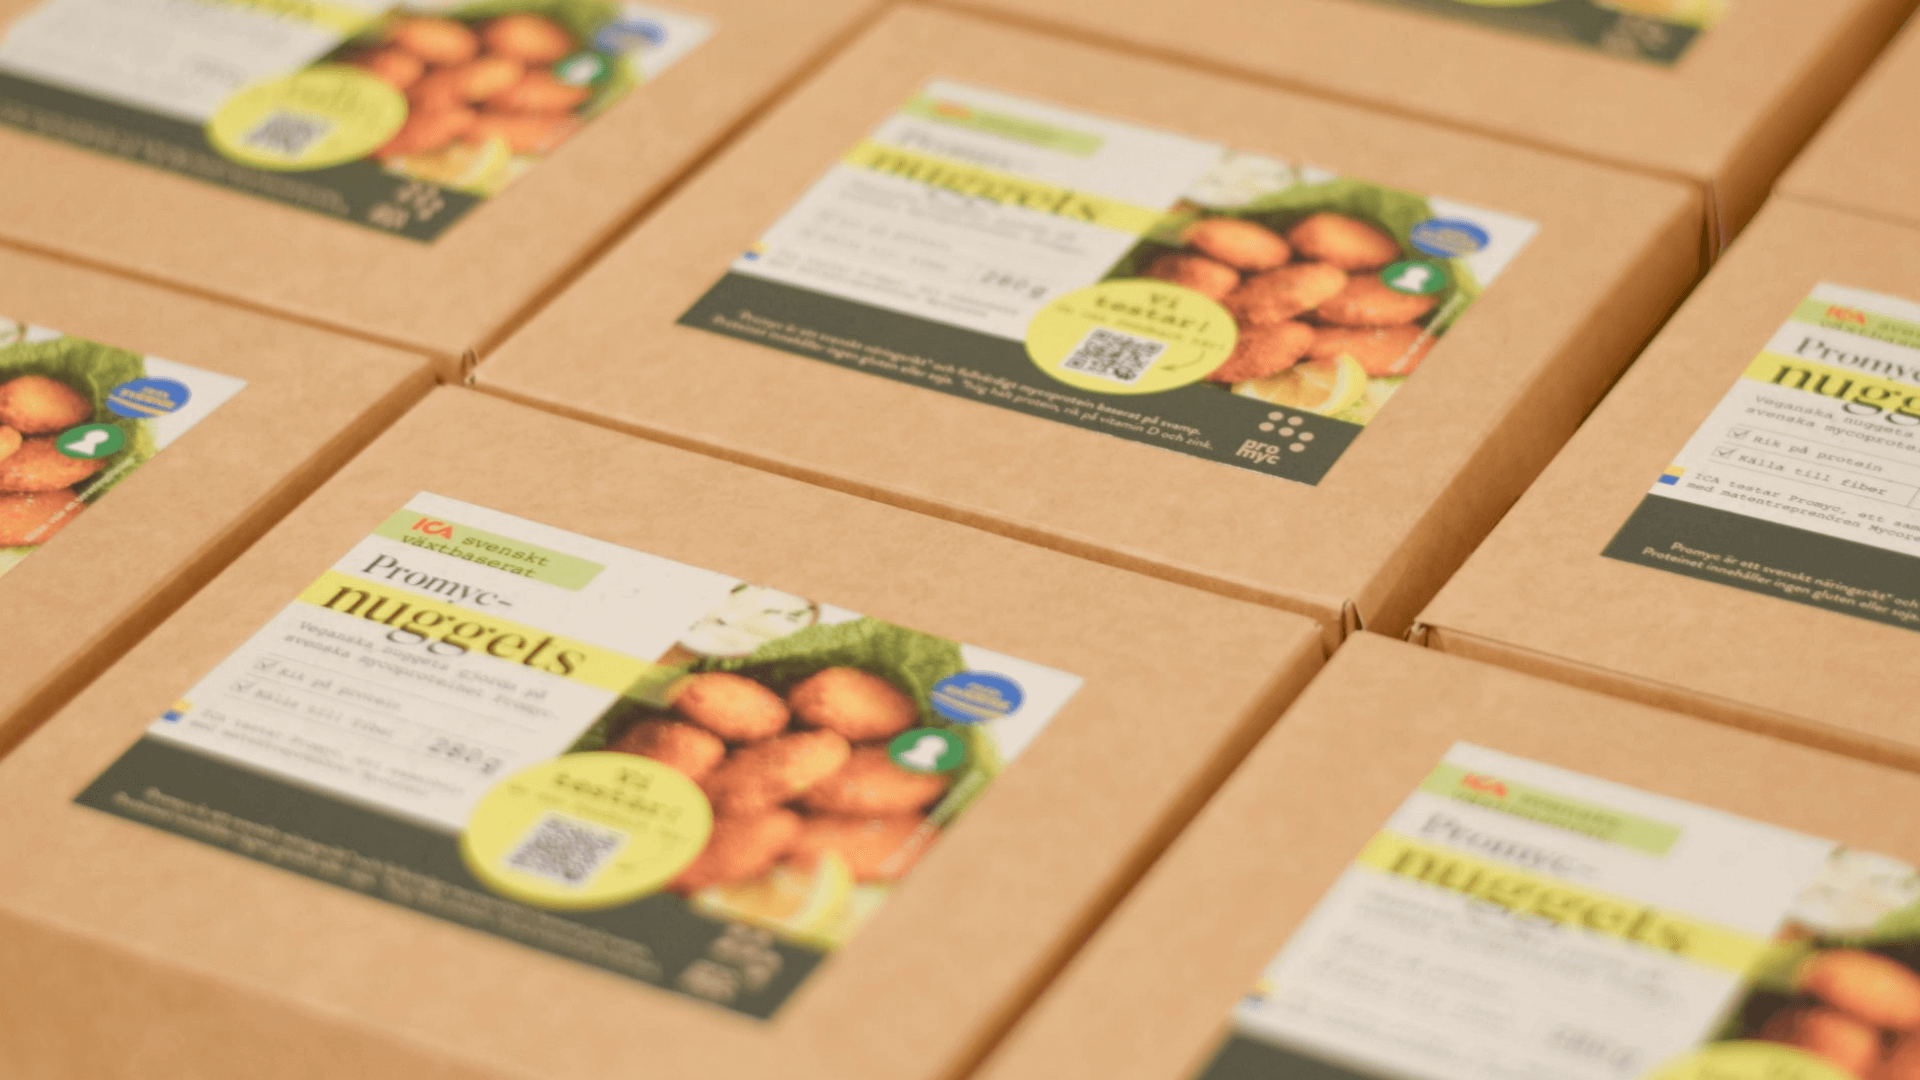 Promyc Nuggets to hit ICA Shelves on June 7th – Mycorena to be the first success story of ICA Växa project